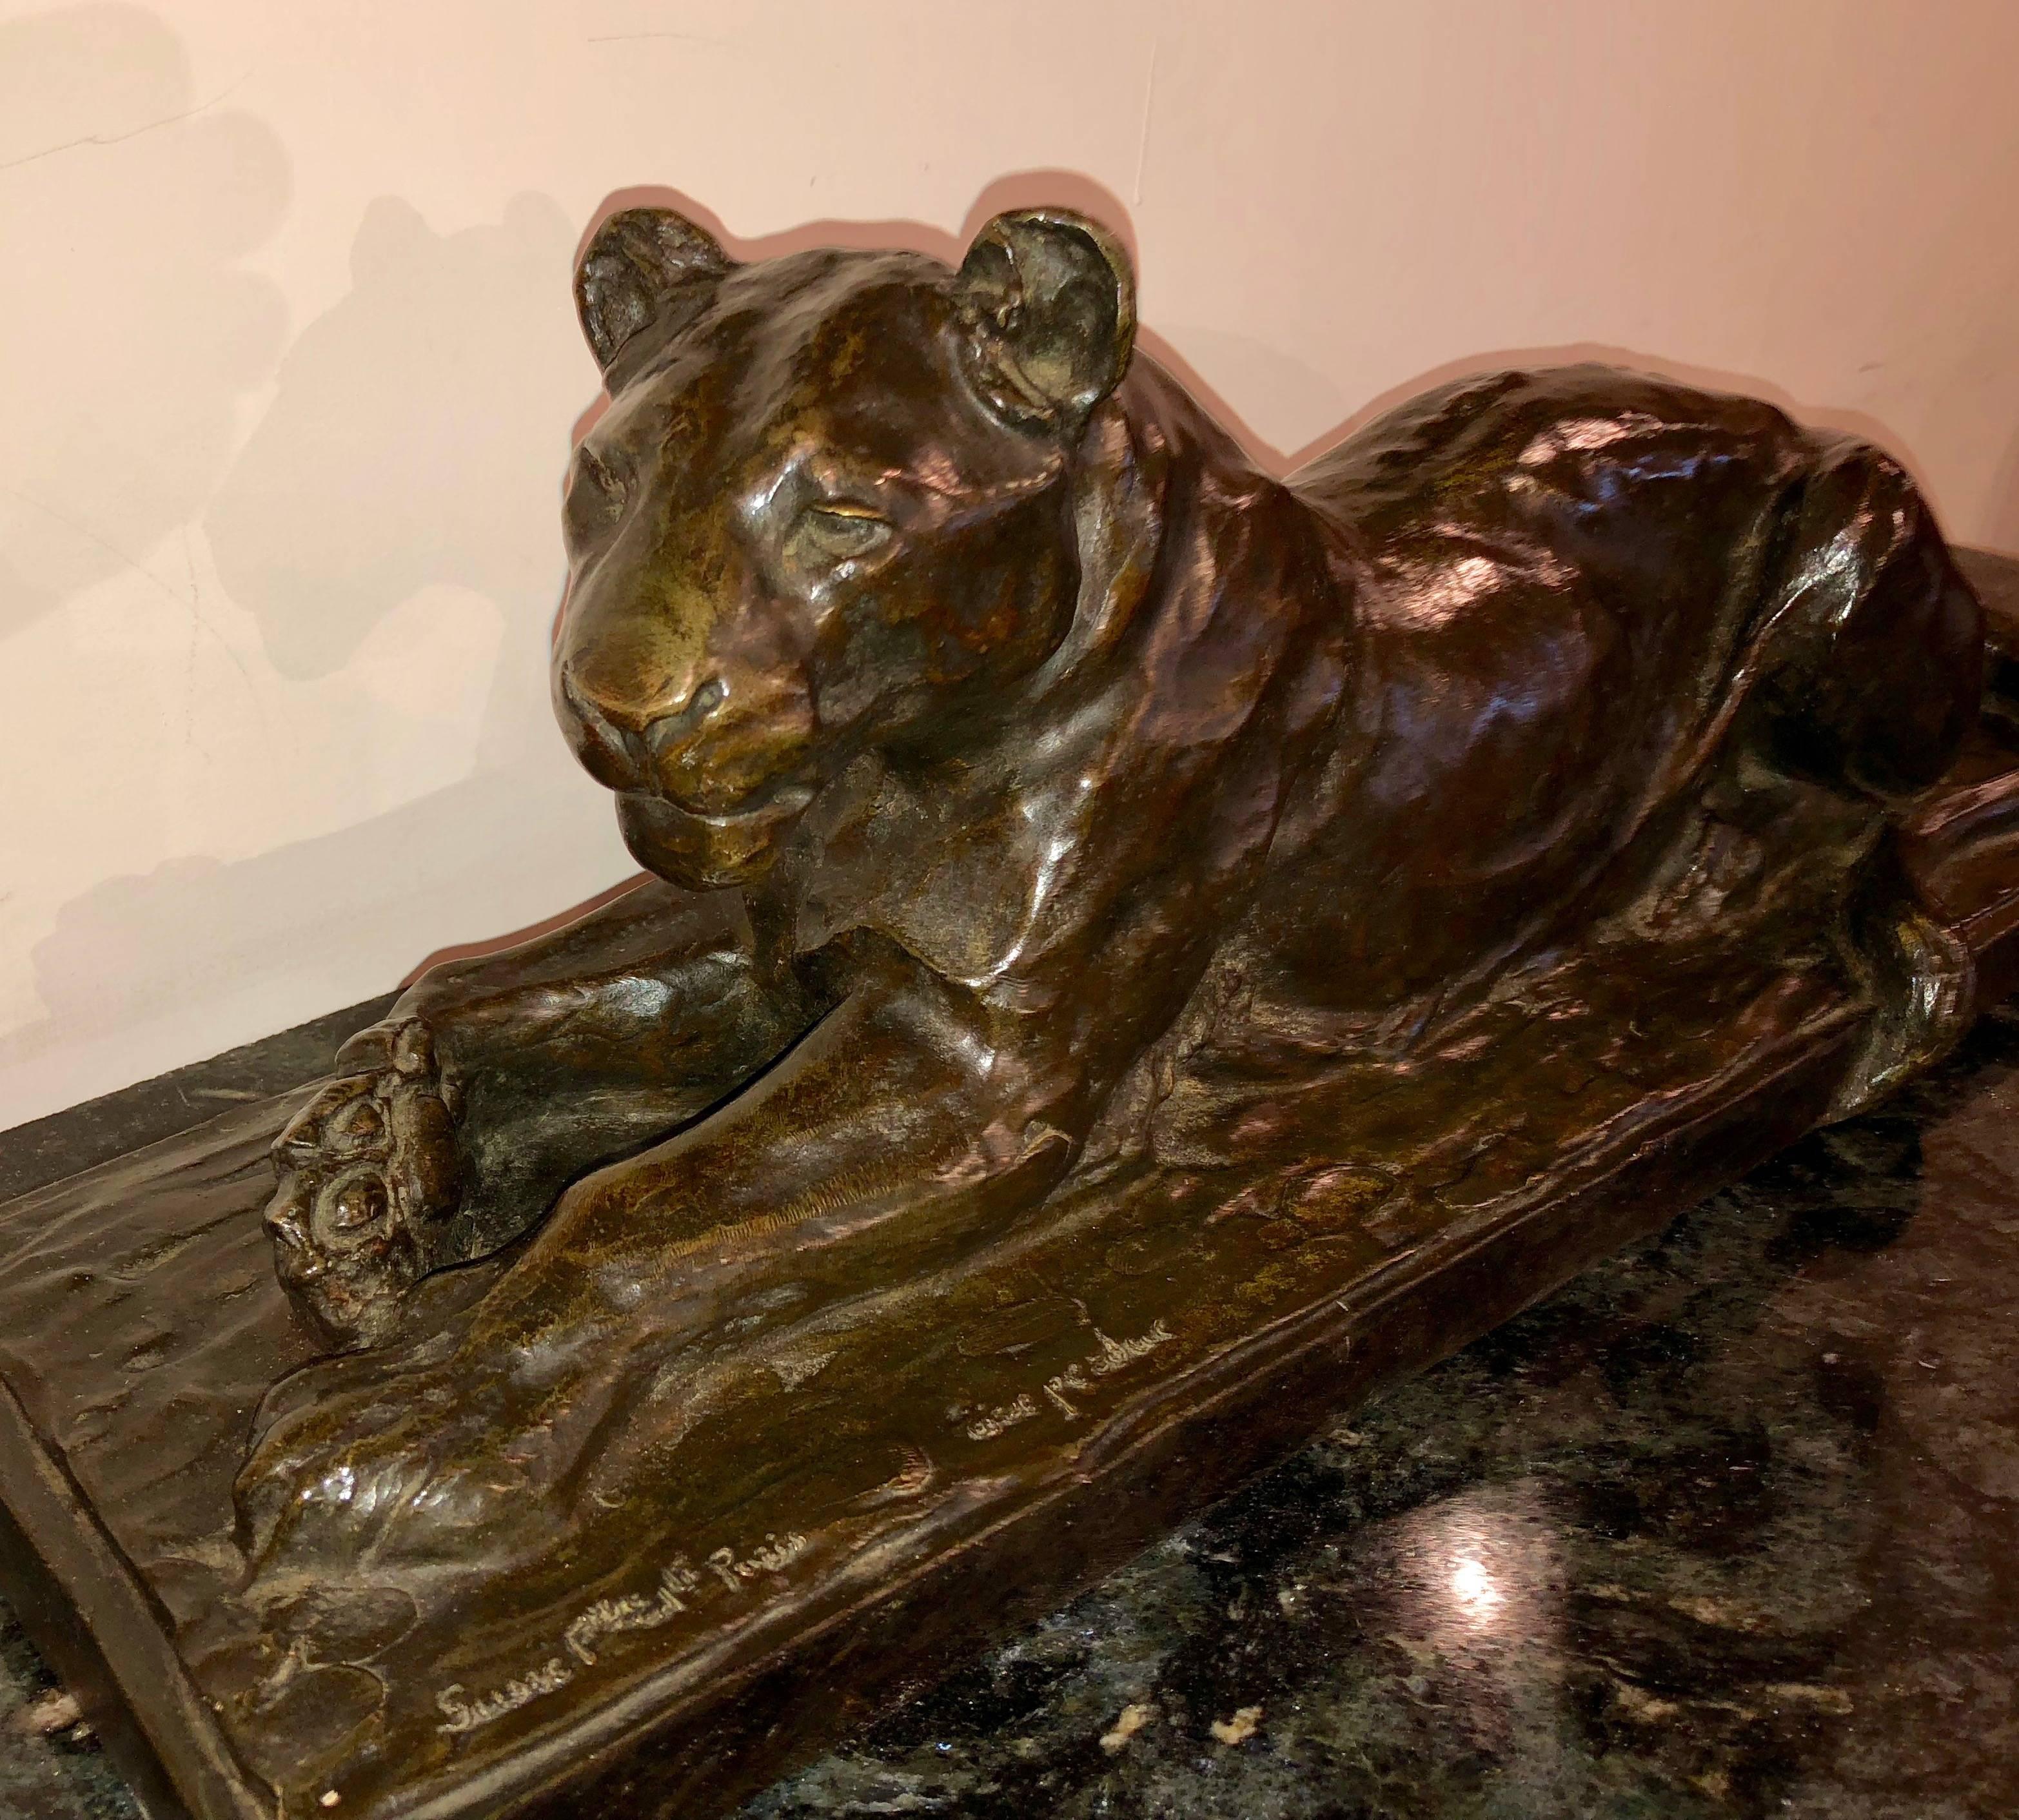 Eartly 20th century bronze by Maurice Prost (1894-1967), depicting model of a Lioness. This is a rare an important sculpture signed M. Prost and inscribed by the founders “Susse Frs Edt. Paris. cire perdue”. It is also stamped “Susses Freres